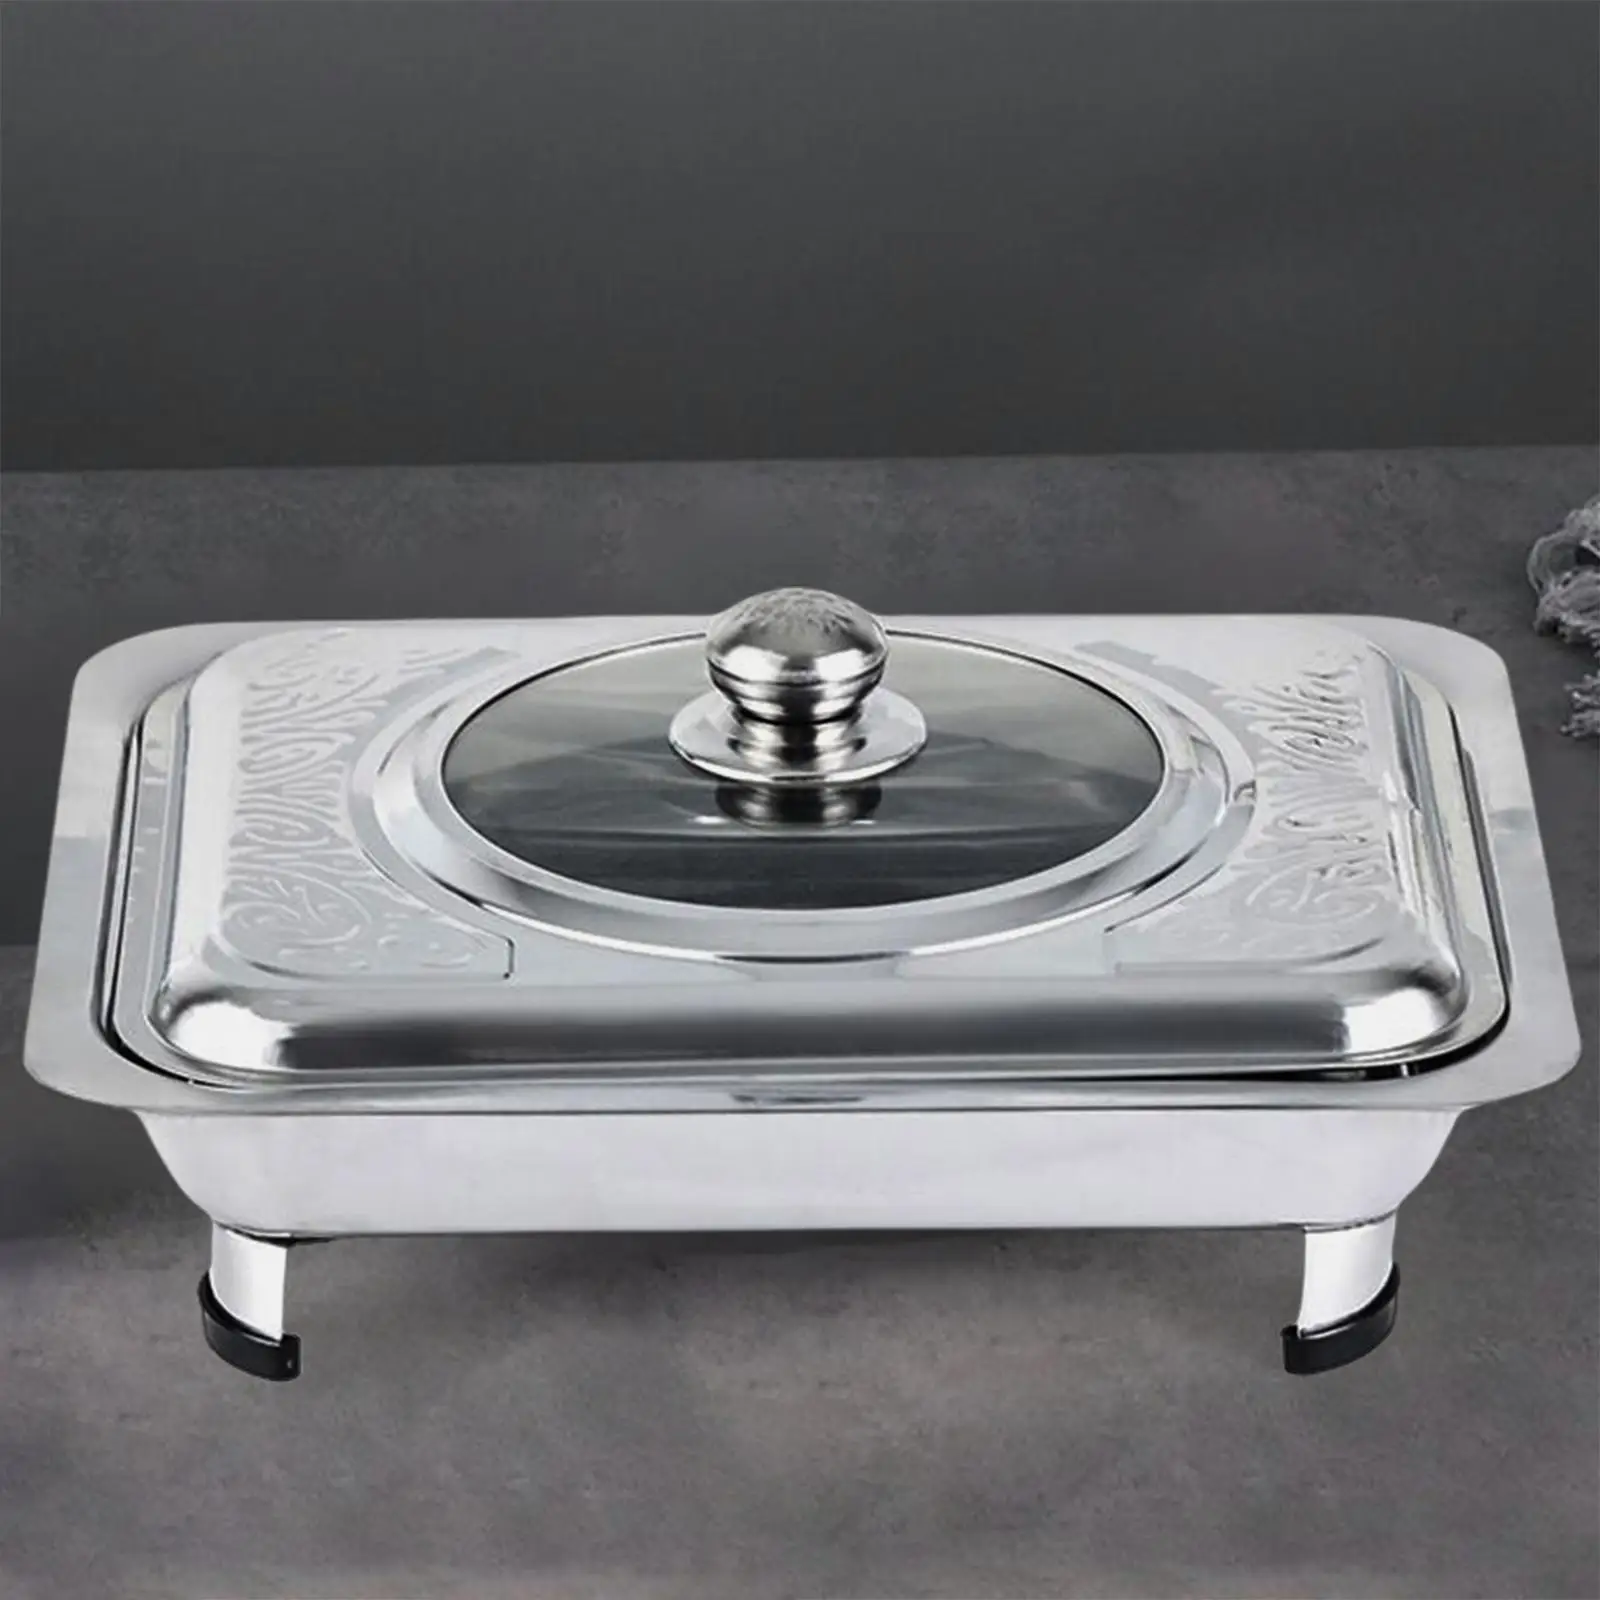 Stainless Steel Rectangular Basin with Lids Silver Plate Warming Tray Chafing Dish for Catering Dinners Parties